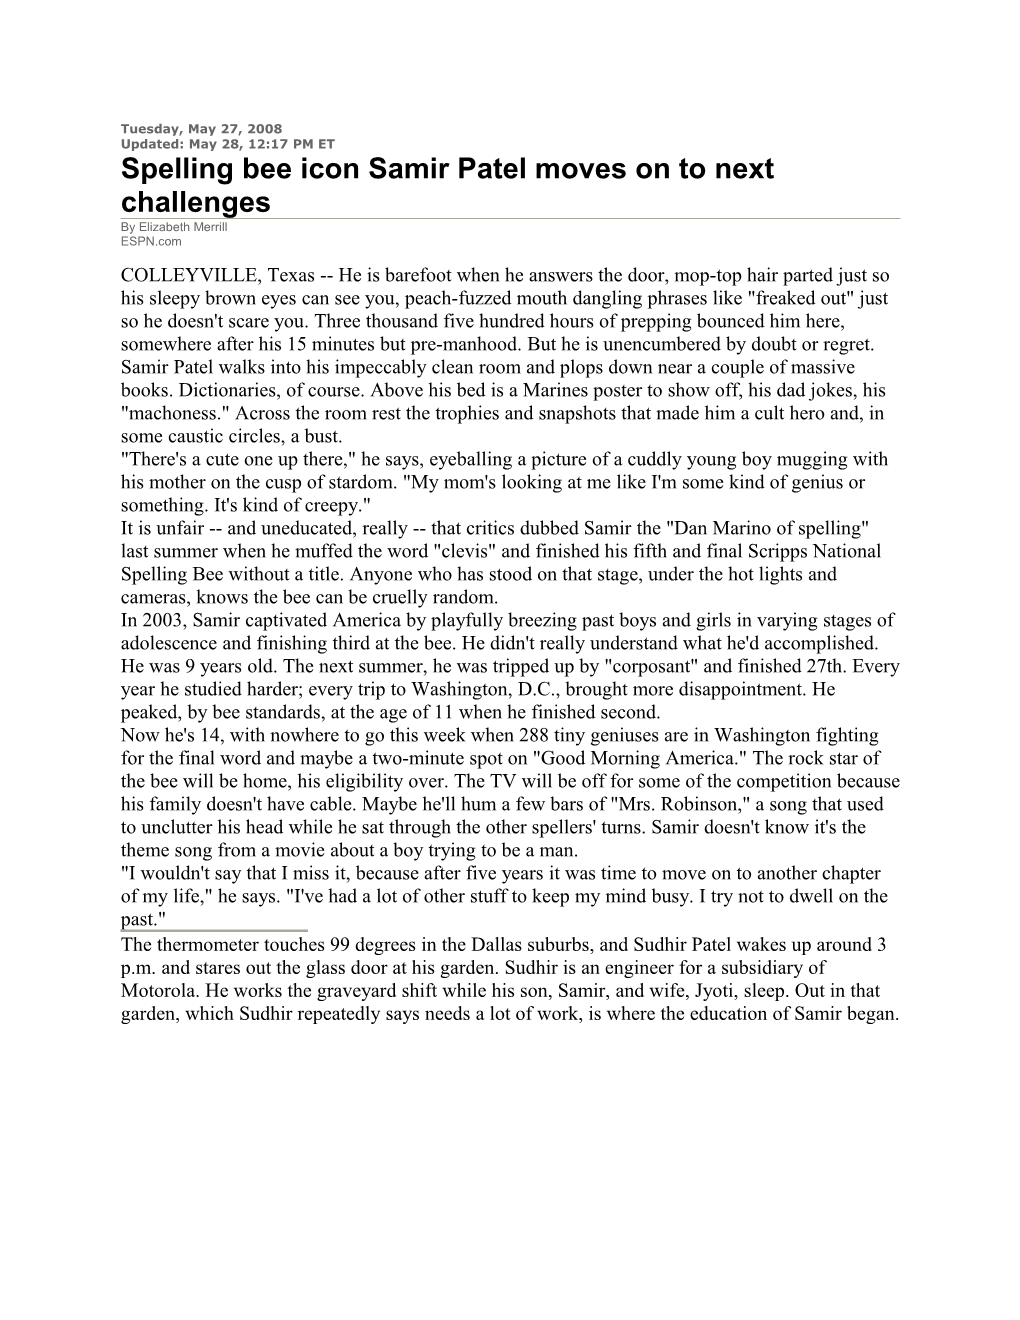 Tuesday, May 27, 2008 Updated: May 28, 12:17 PM ET Spelling Bee Icon Samir Patel Moves